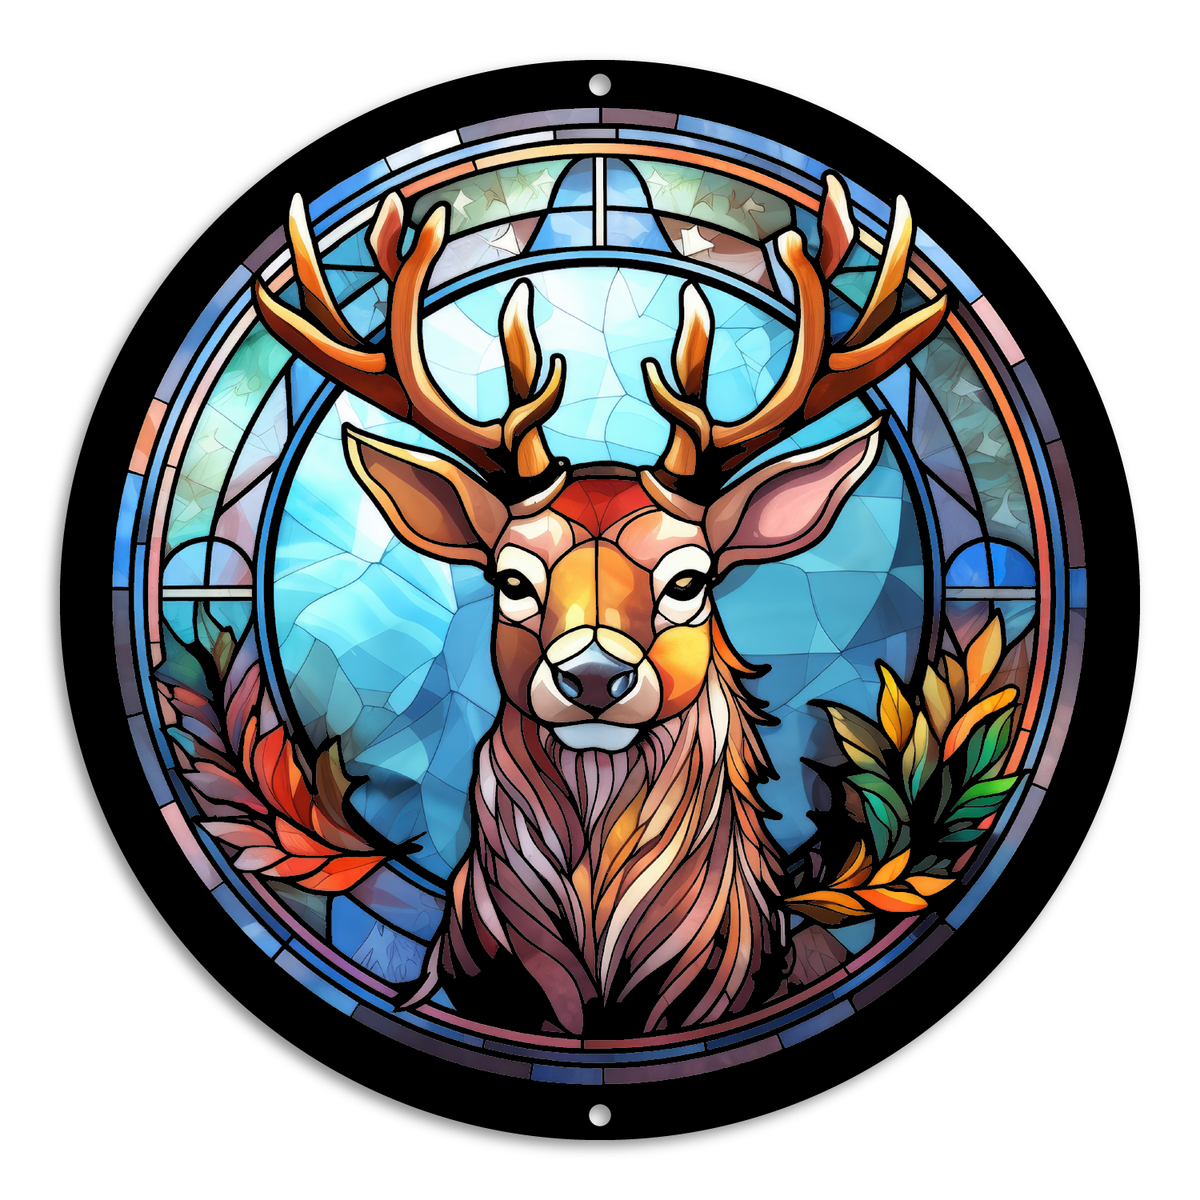 CKE-15 Deer Portrait (Stained Glass Full Size Patterns)